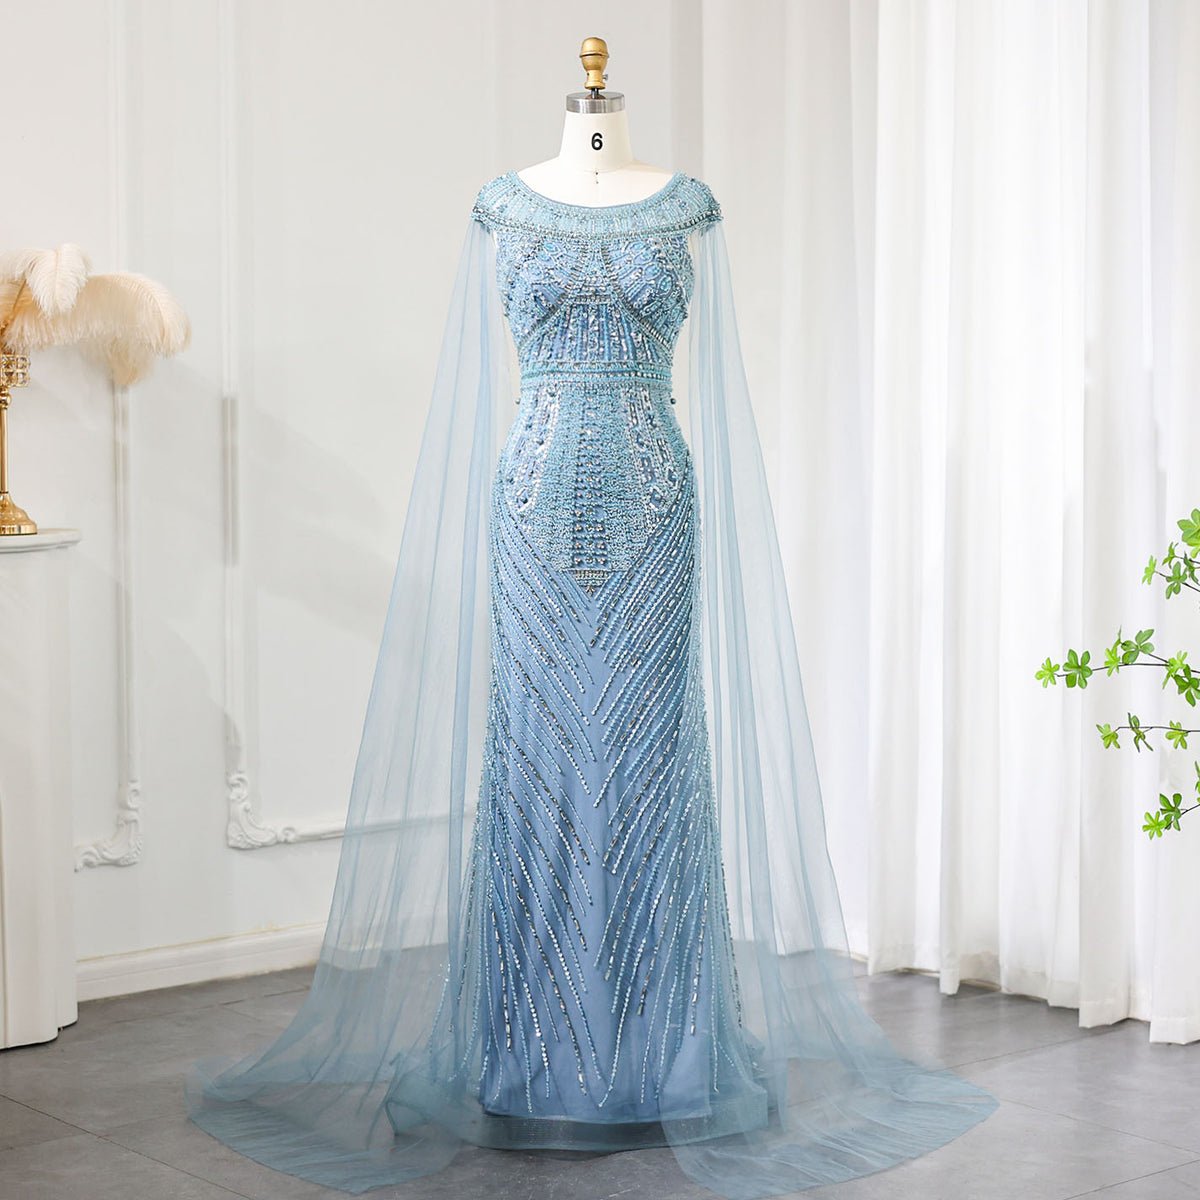 Sharon Said Luxury Beaded Blue Mermaid Dubai Evening Dresses with Cape Sleeves 2024 Plus Size Women Wedding Party Gown SS195